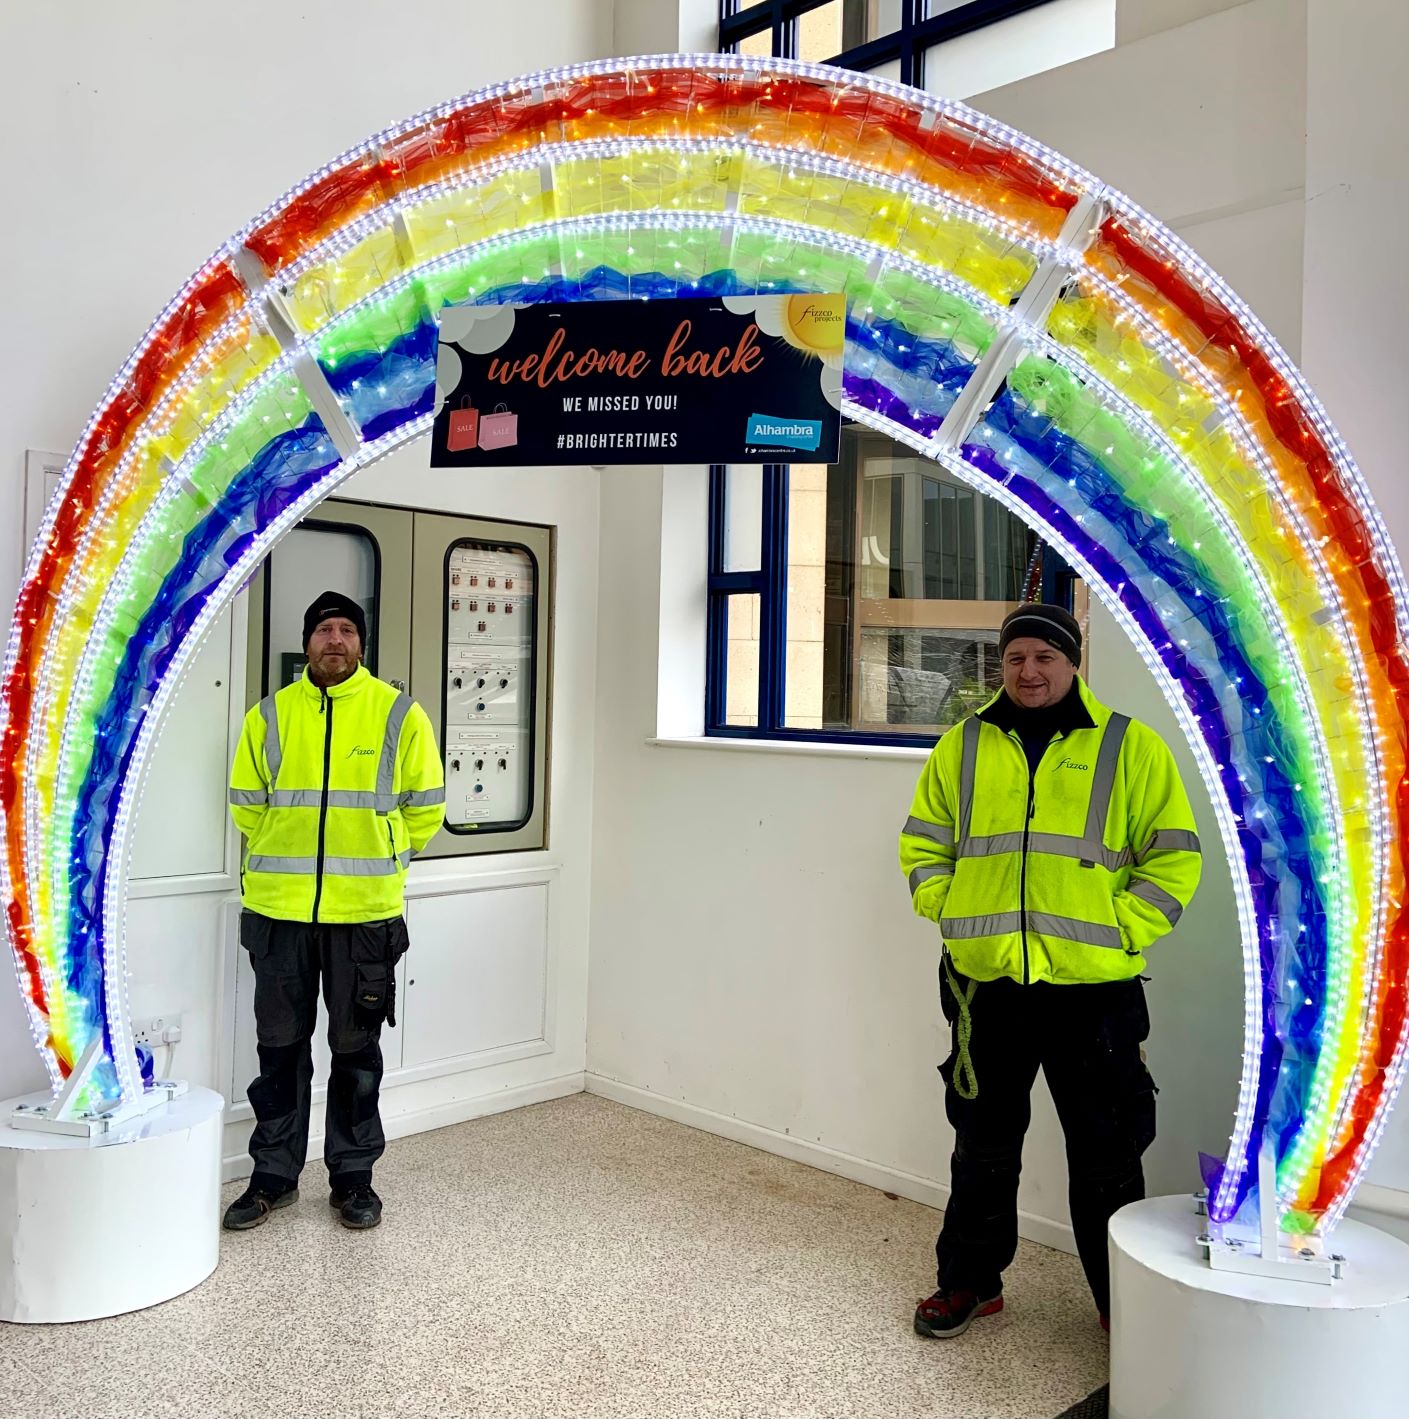 Light up rainbow arch displayed inside Alhambra Shopping Centre with two installers stood under the arch.